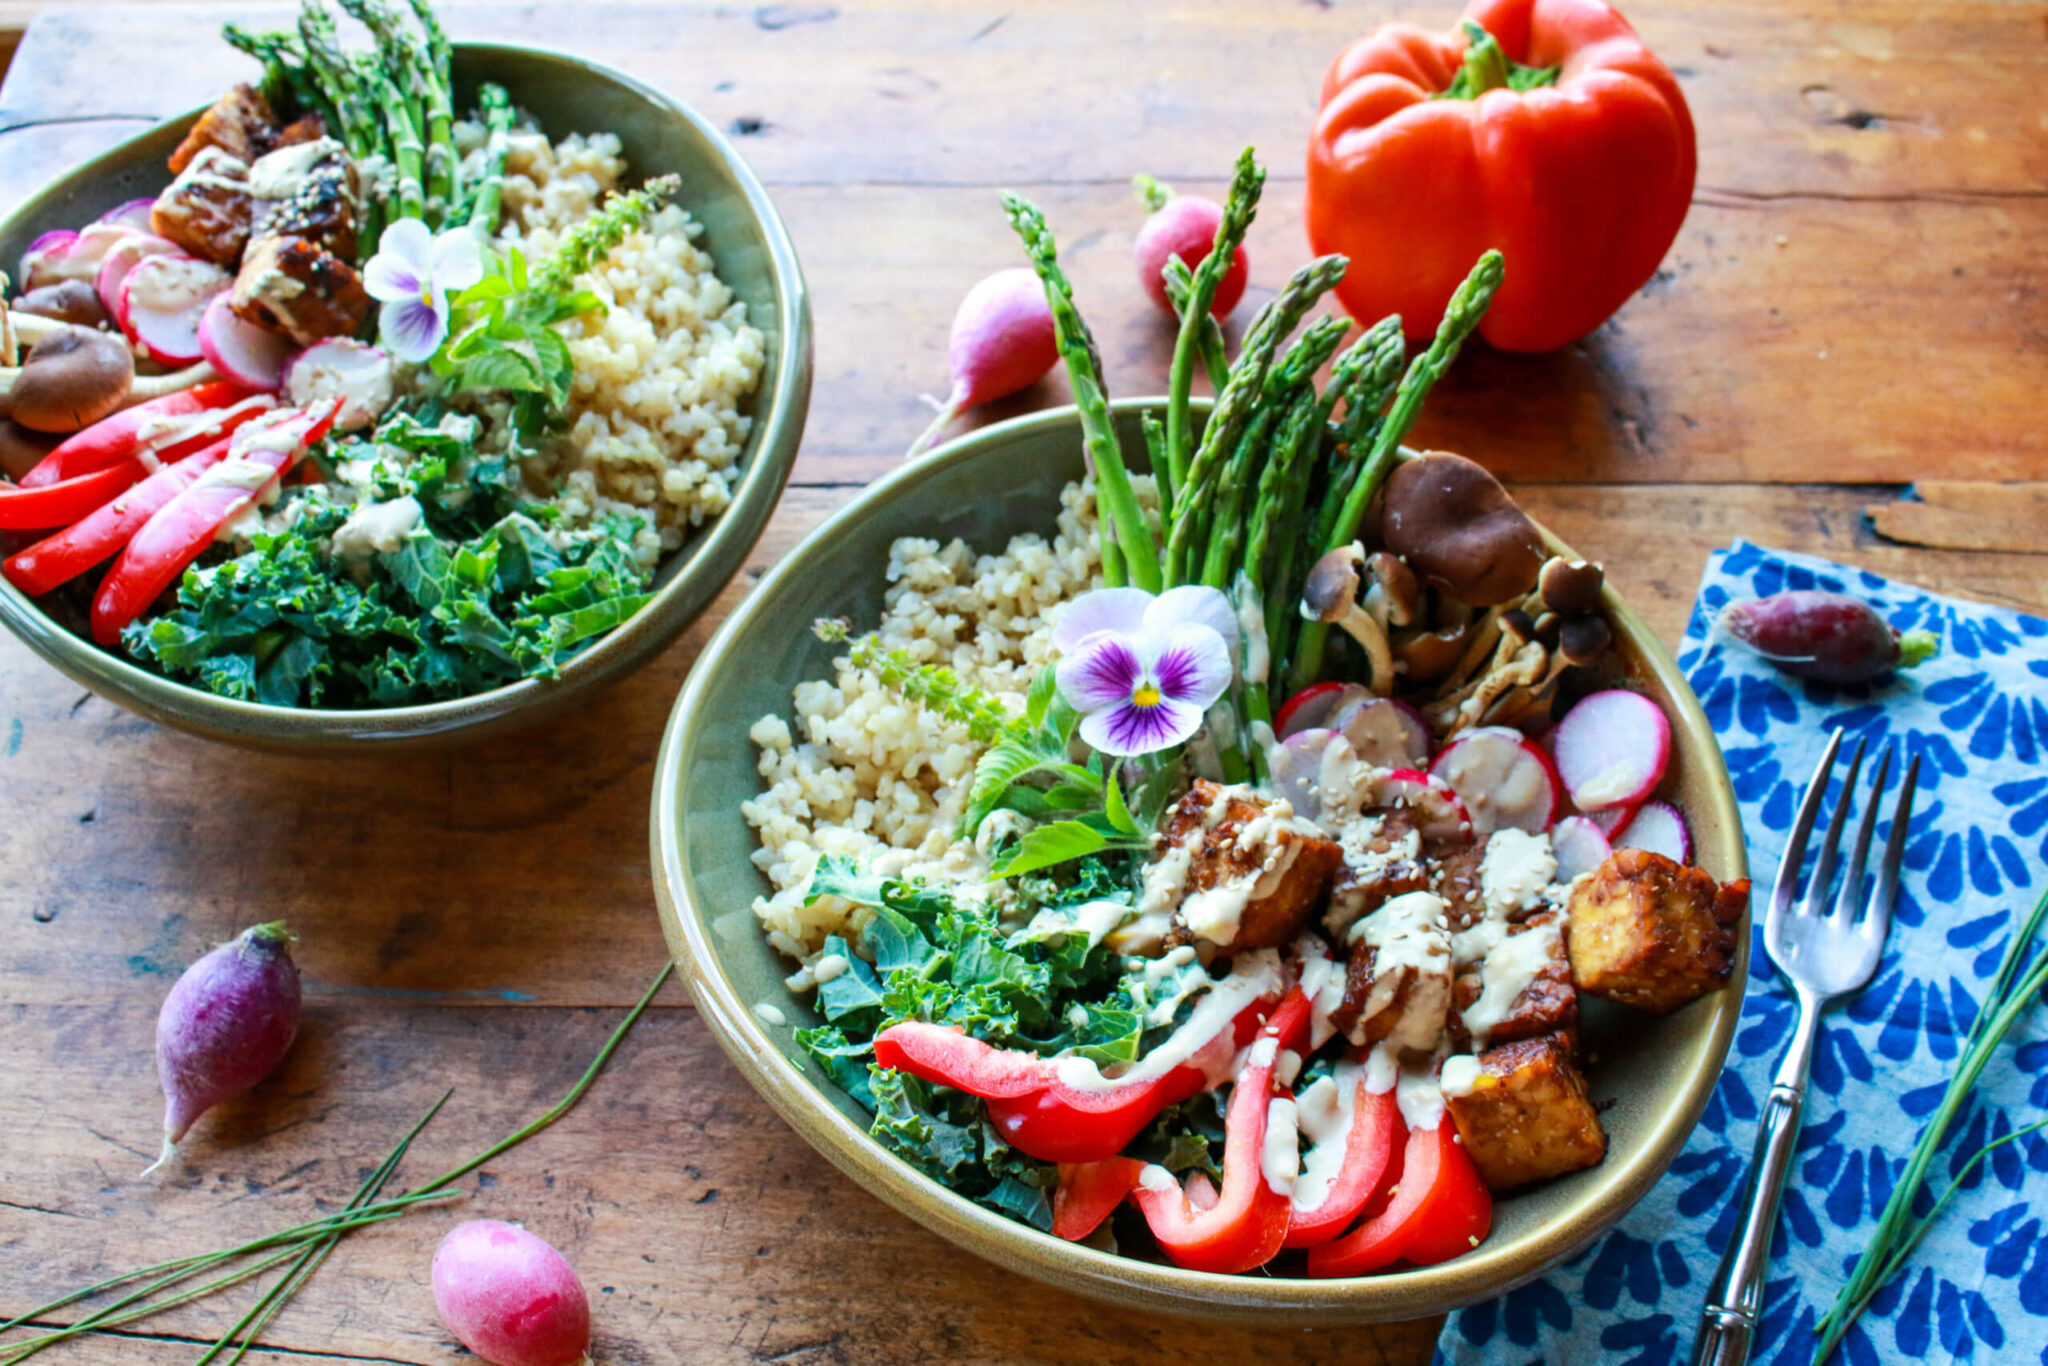 5 New Plant-Primarily based Meals to Eat Now